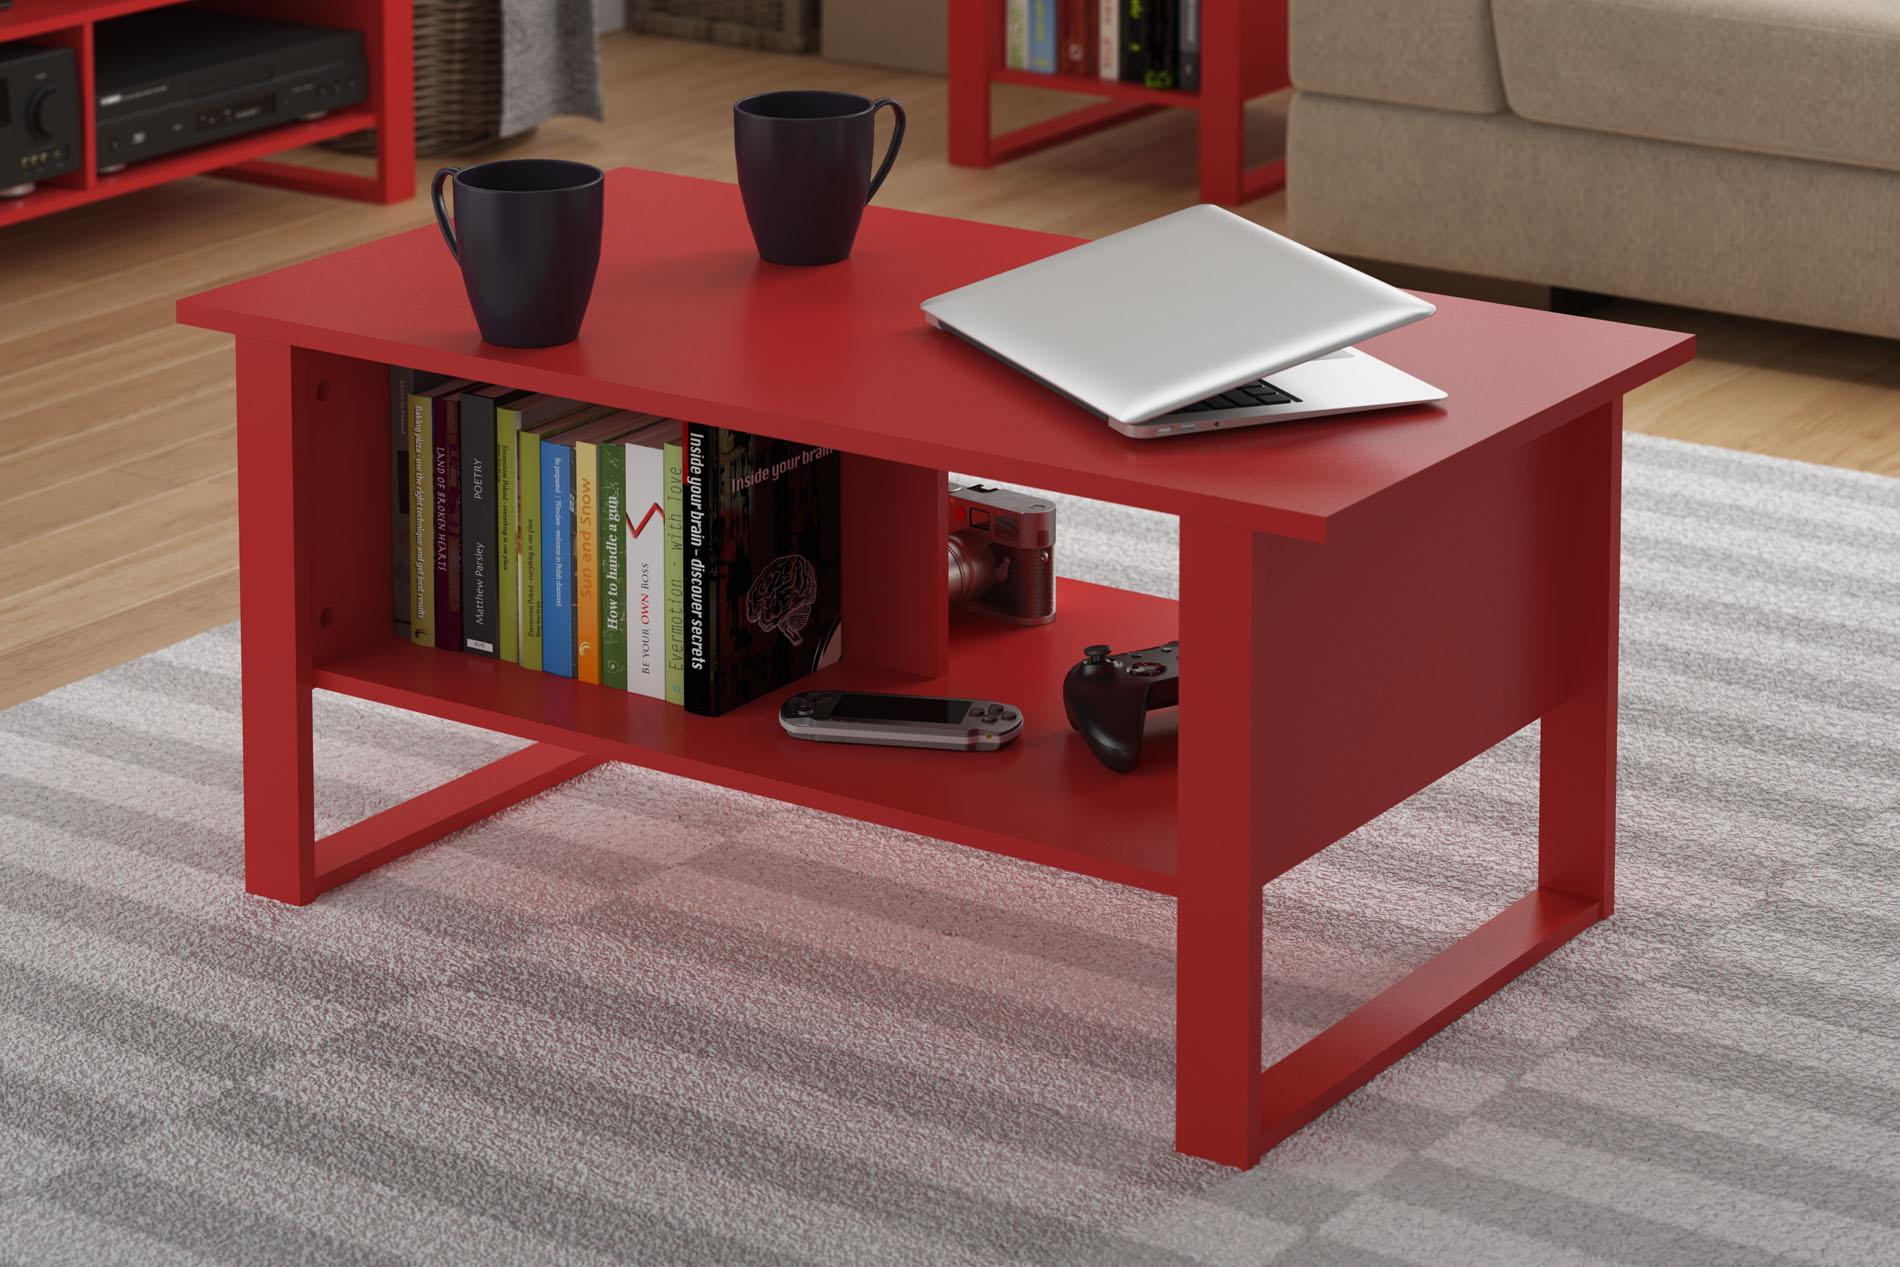 Red Coffee Table Materials